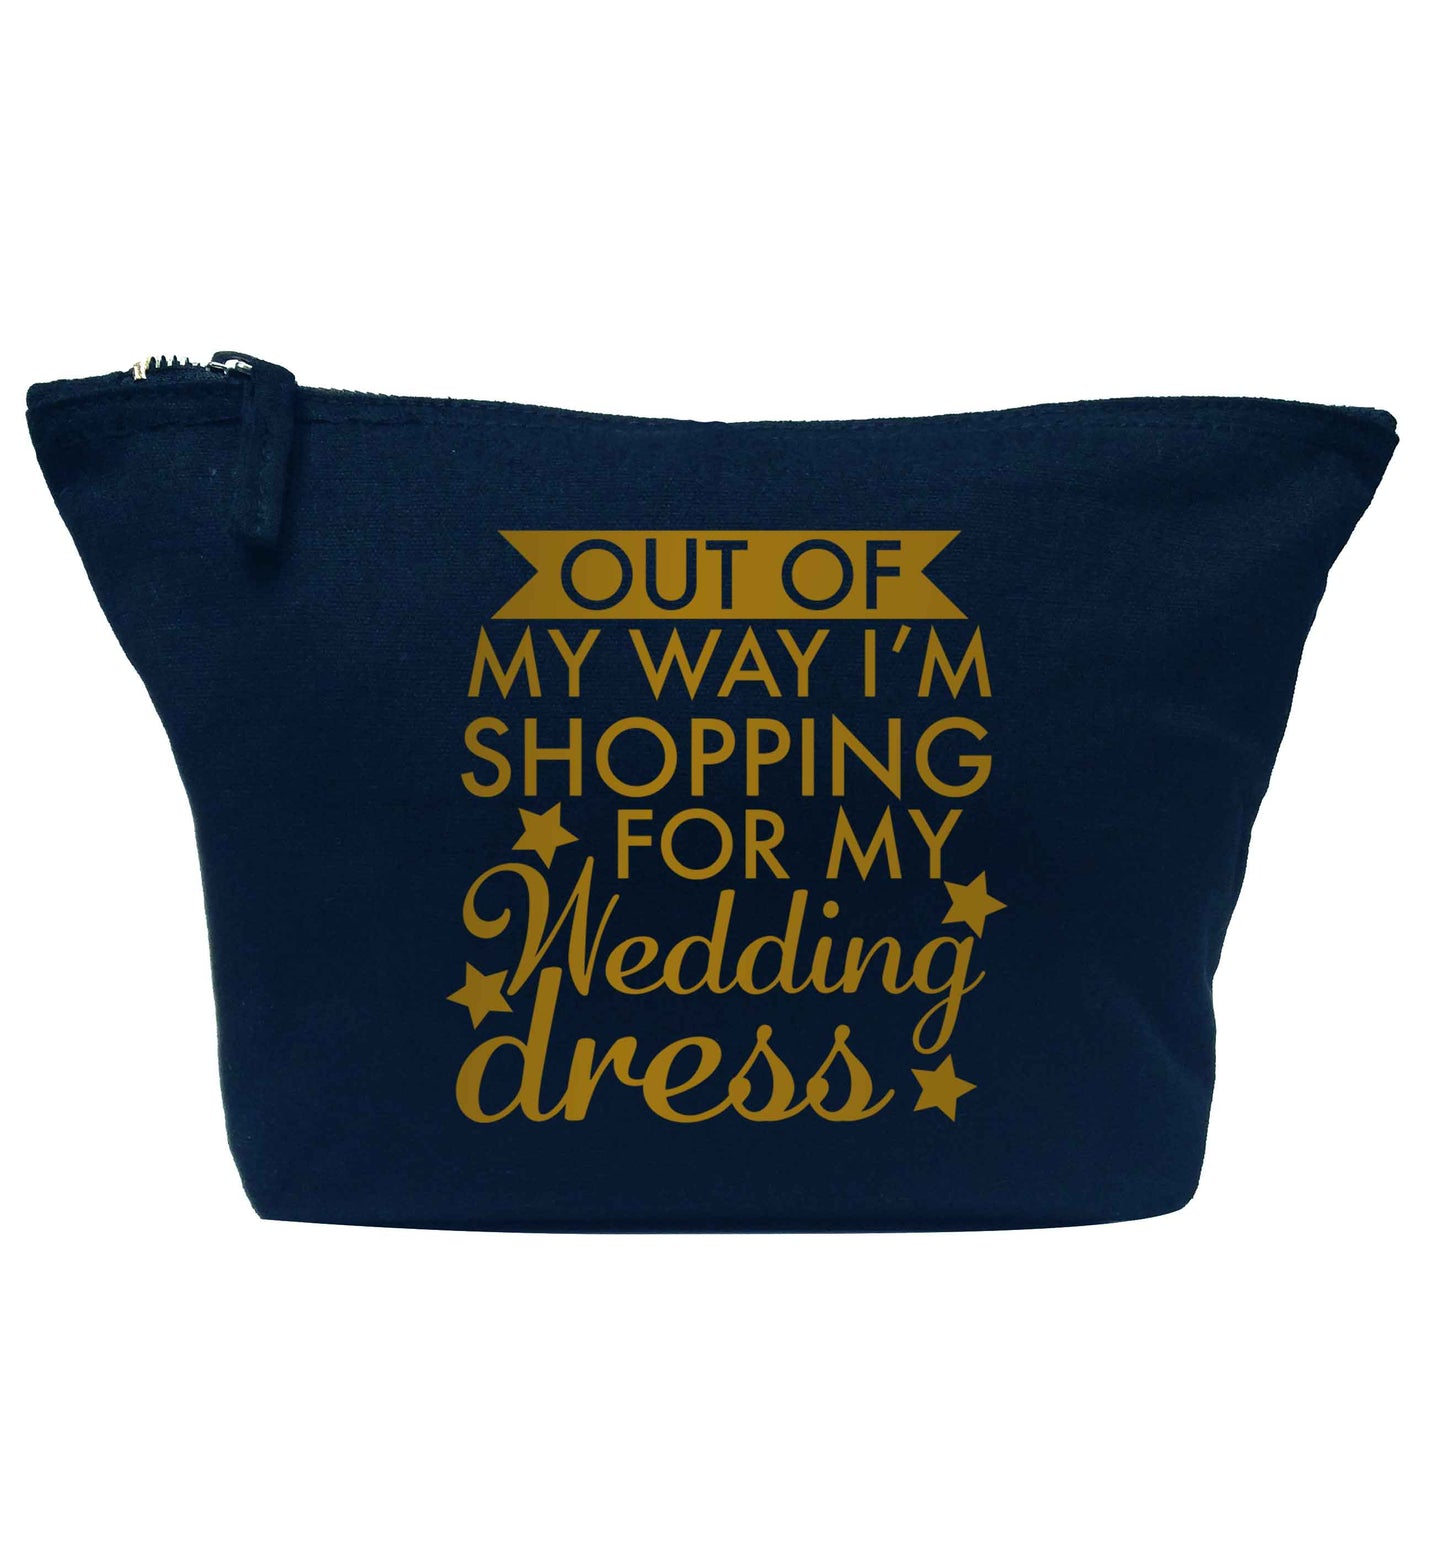 Out of my way I'm shopping for my wedding dress navy makeup bag